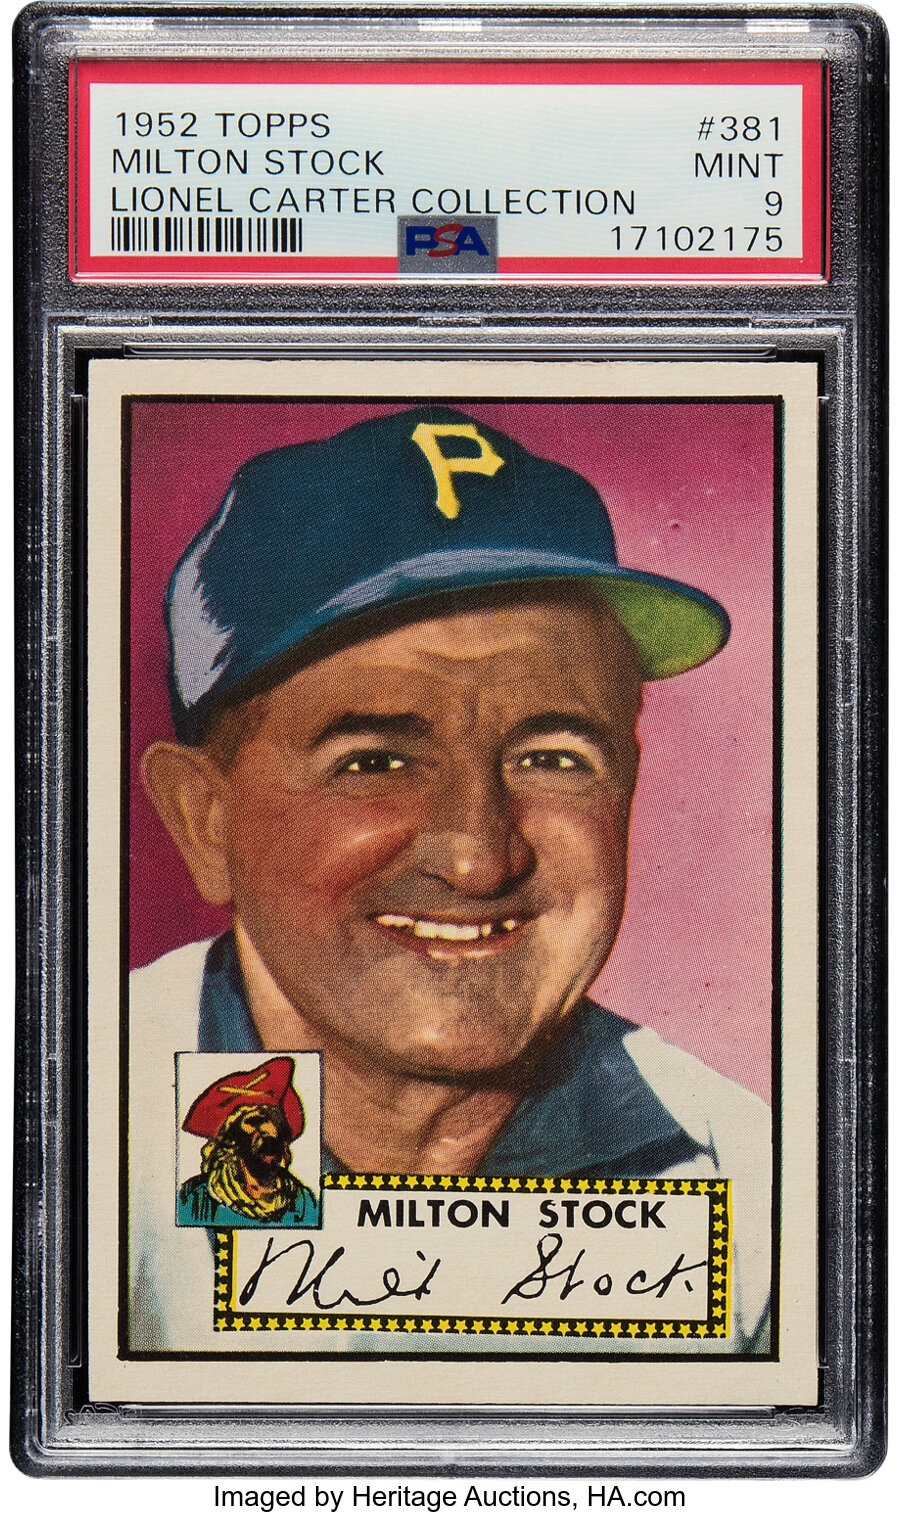 1952 Topps Milton Stock Rookie #381 PSA Mint 9 - Pop Two, None Superior! From the Lionel Carter Collection